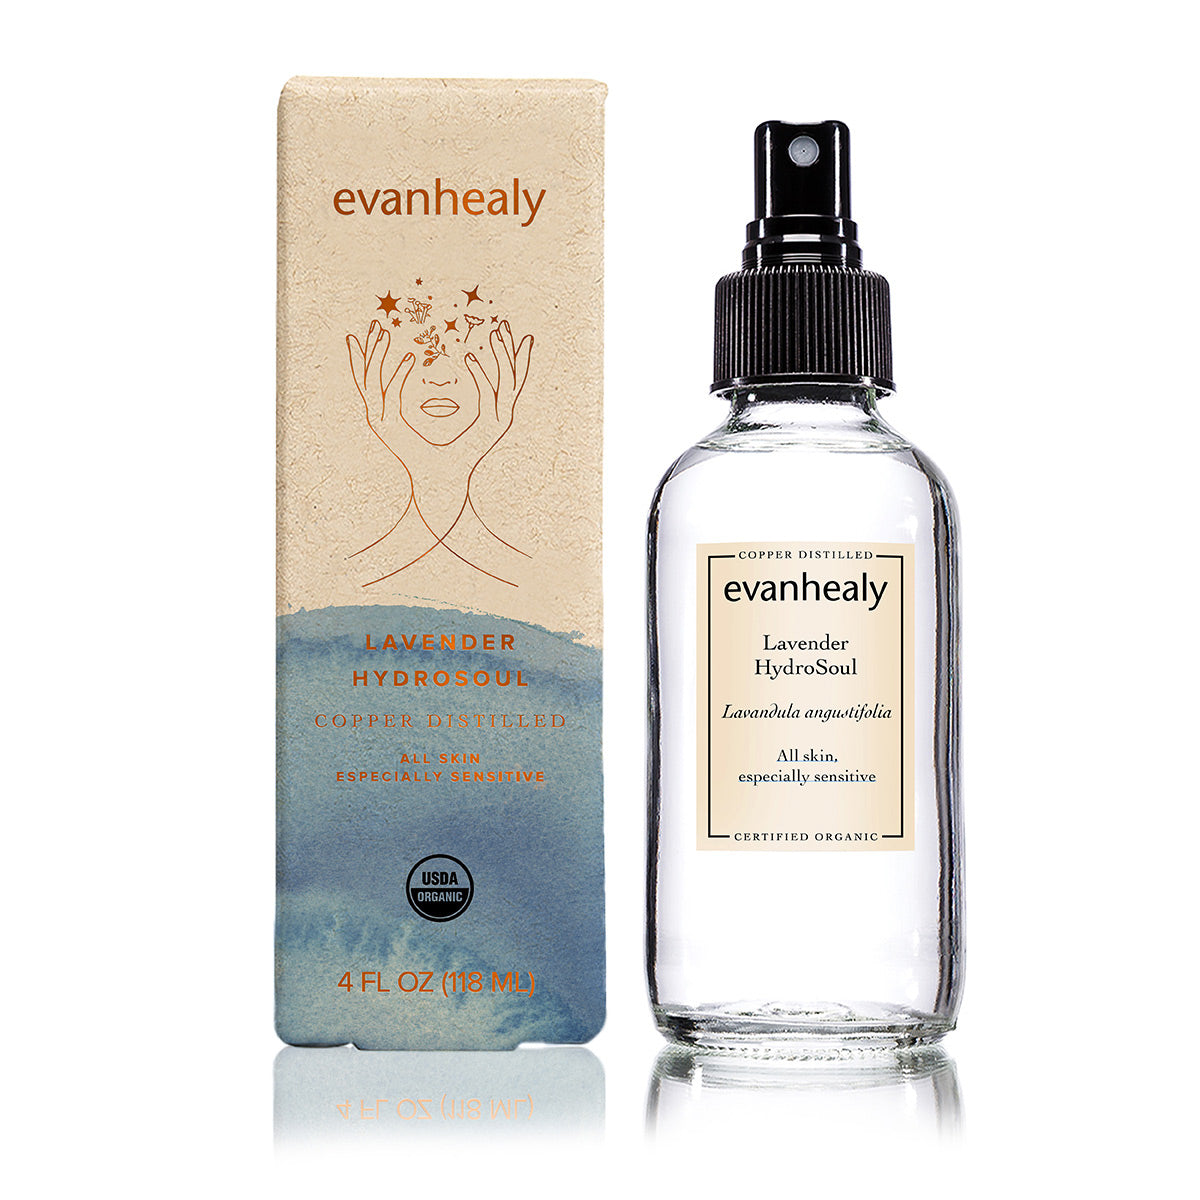 evanhealy lavender facial tonic hydrosol with product box